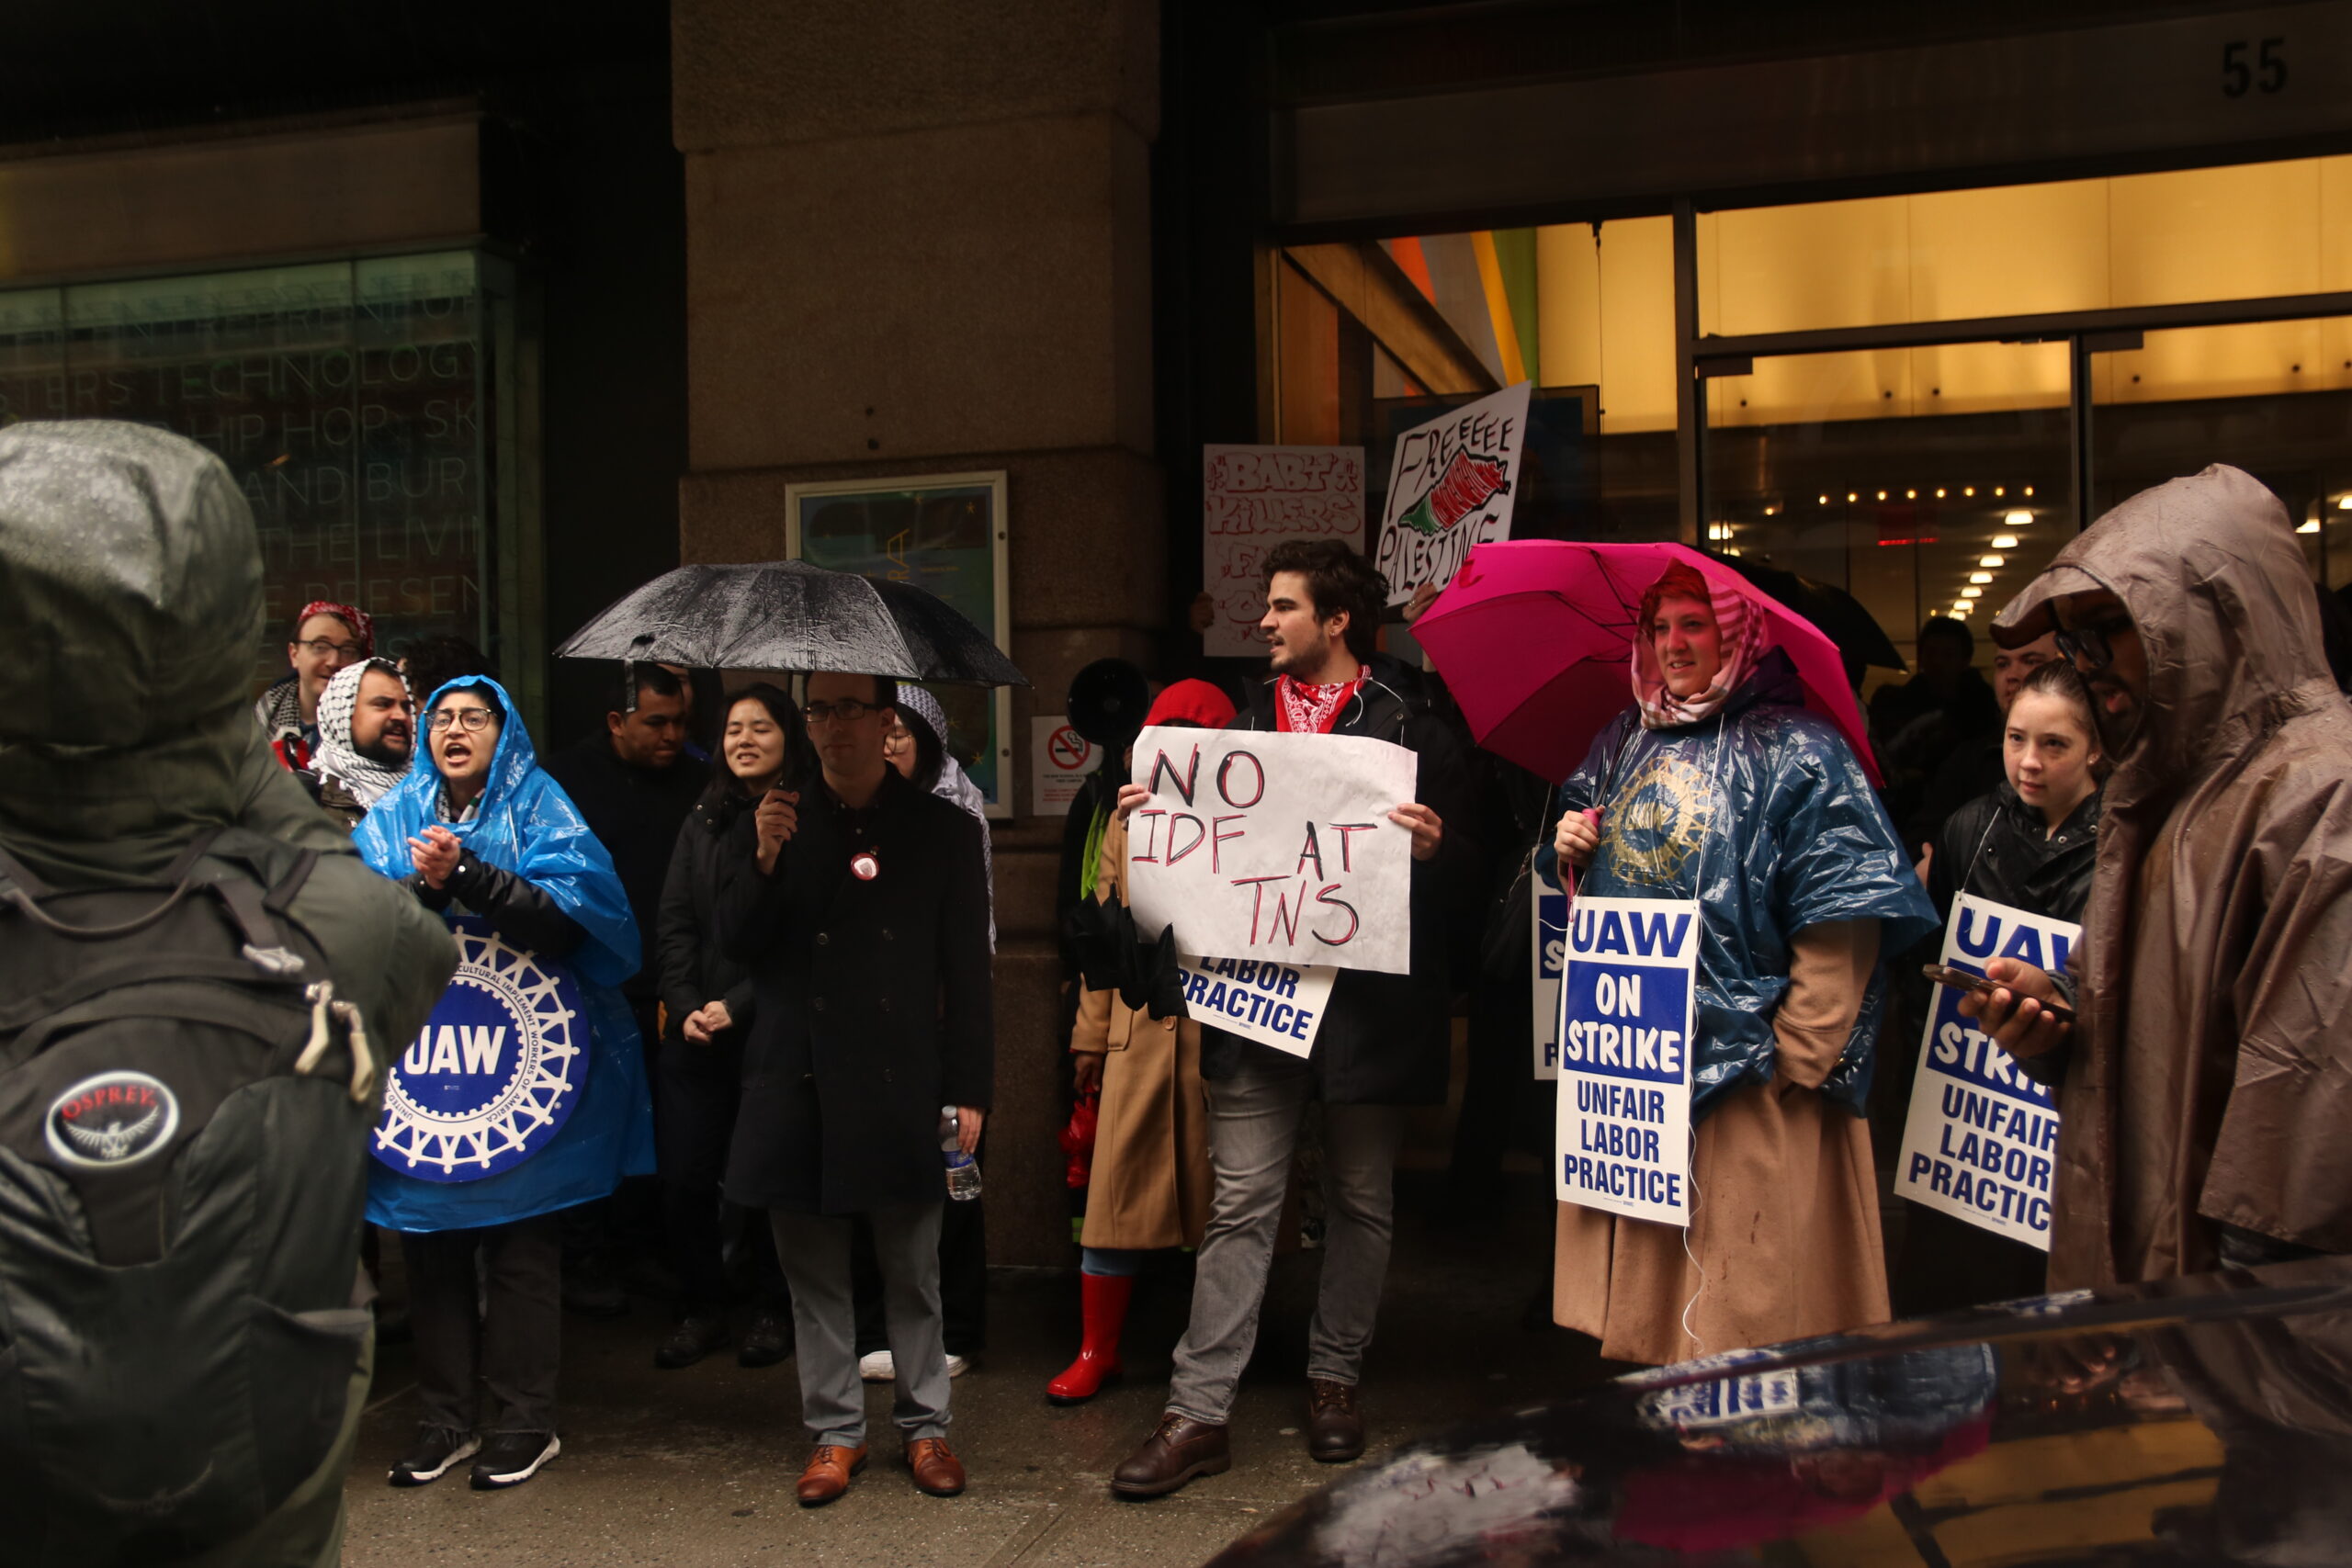 Protestors and picketers stand outside the main entrance to Arnhold Hall. Some are wearing ponchos and raincoats, and others holding umbrellas. A few people are wearing signs that say “UAW On Strike, Unfair Labor Practice.” An individual in the center of the image, wearing a red bandana around their neck, is holding a sign that reads, “NO IDF AT TNS.”